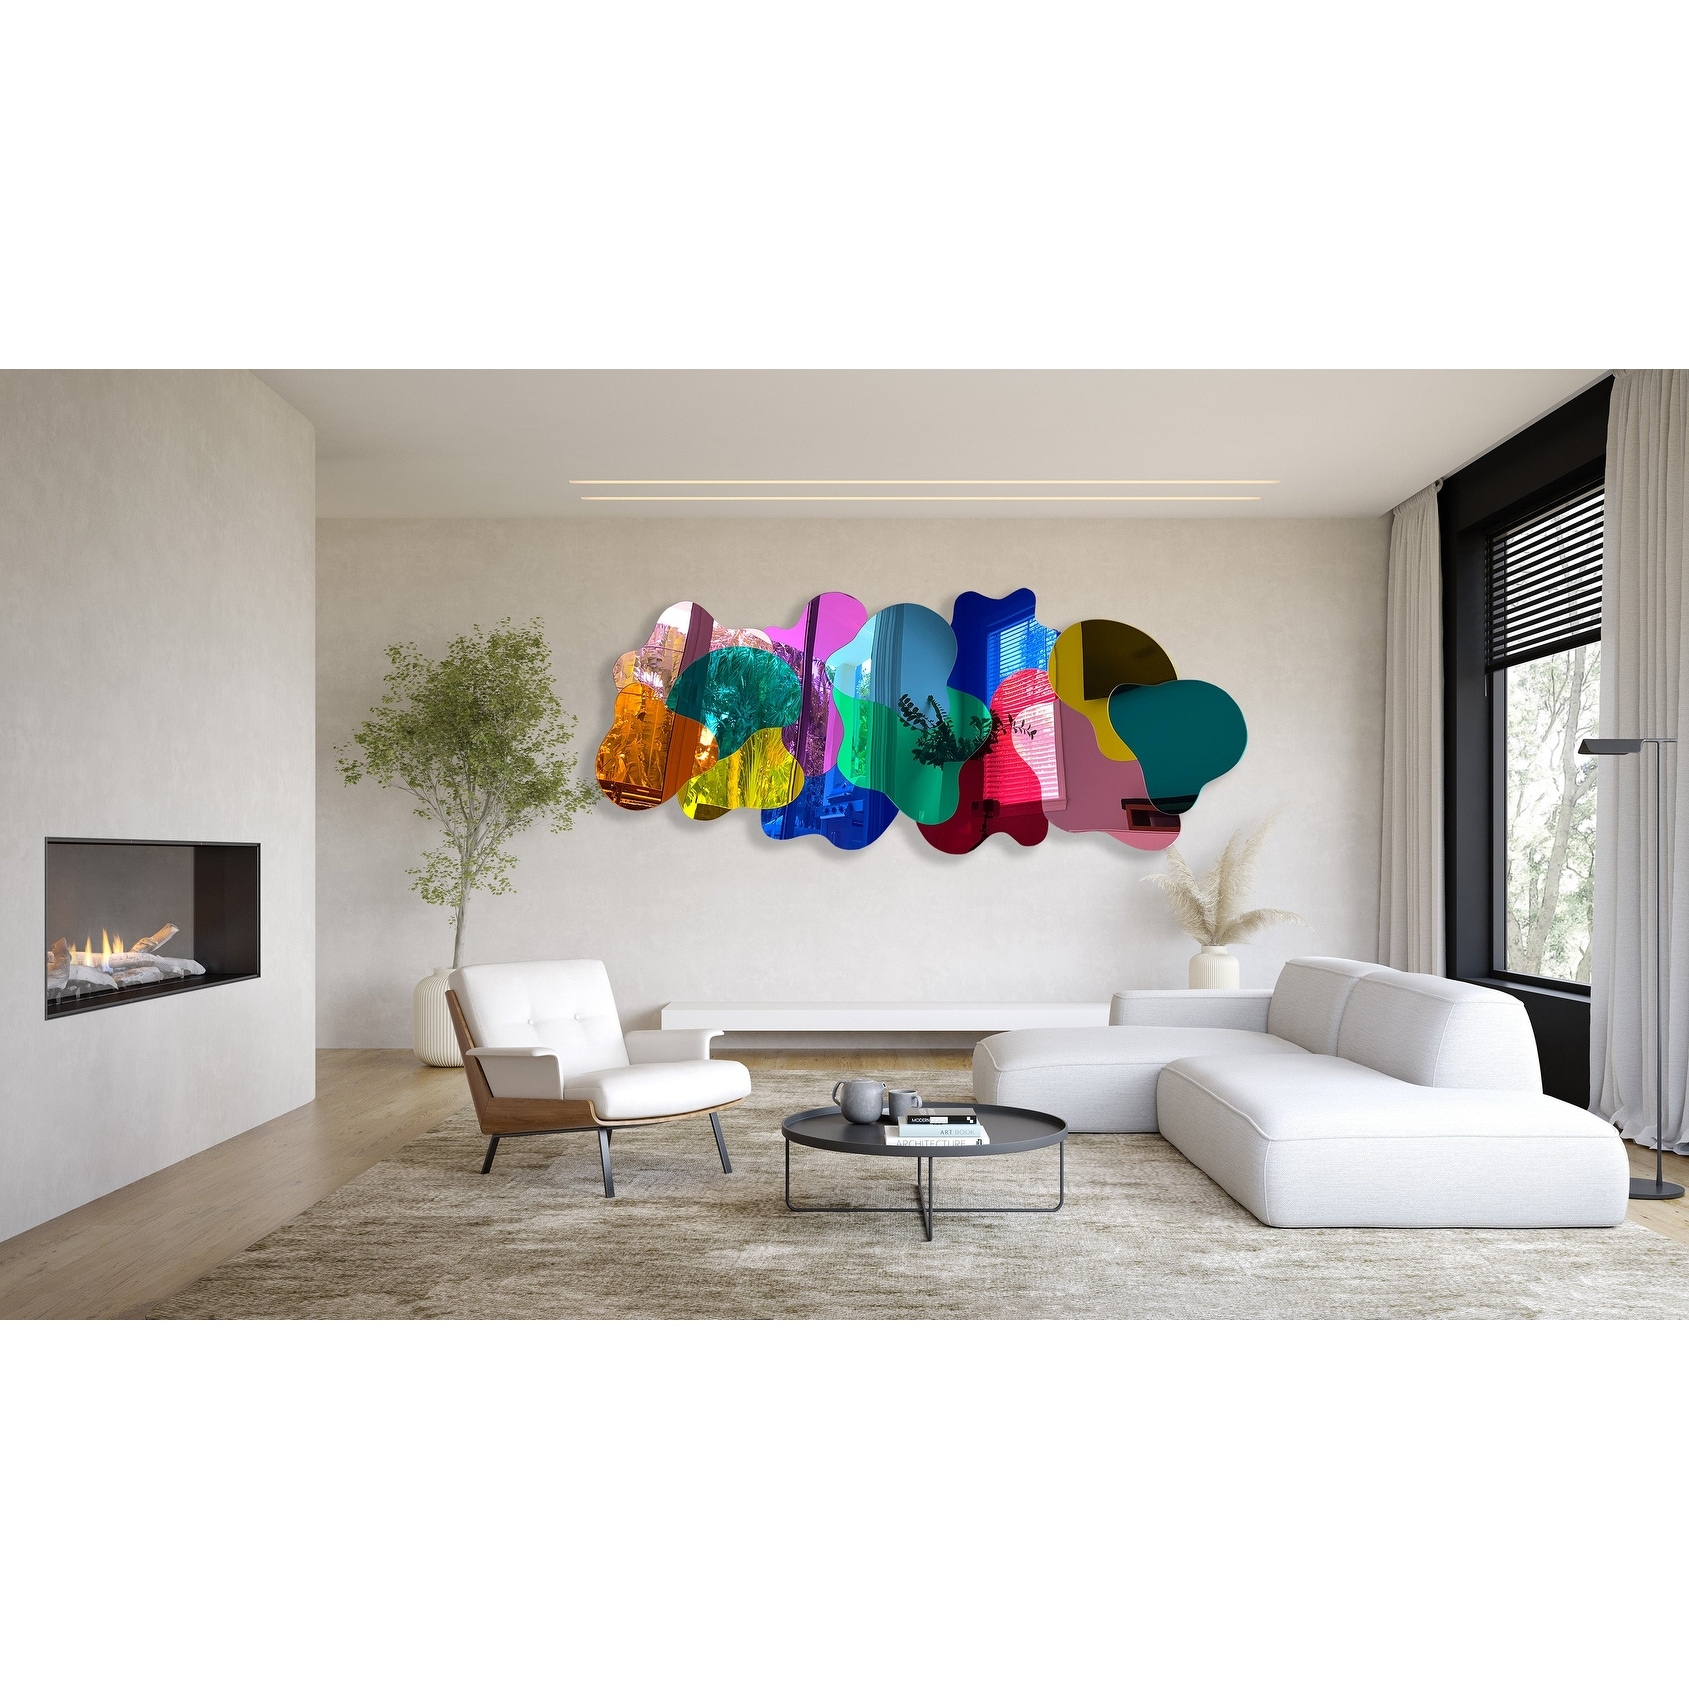 Oversized Multicolor Squares /Transparent Acrylic Art / Wall Sculpture/Abstract Wall Decor/ 3D Wall Art - See Description